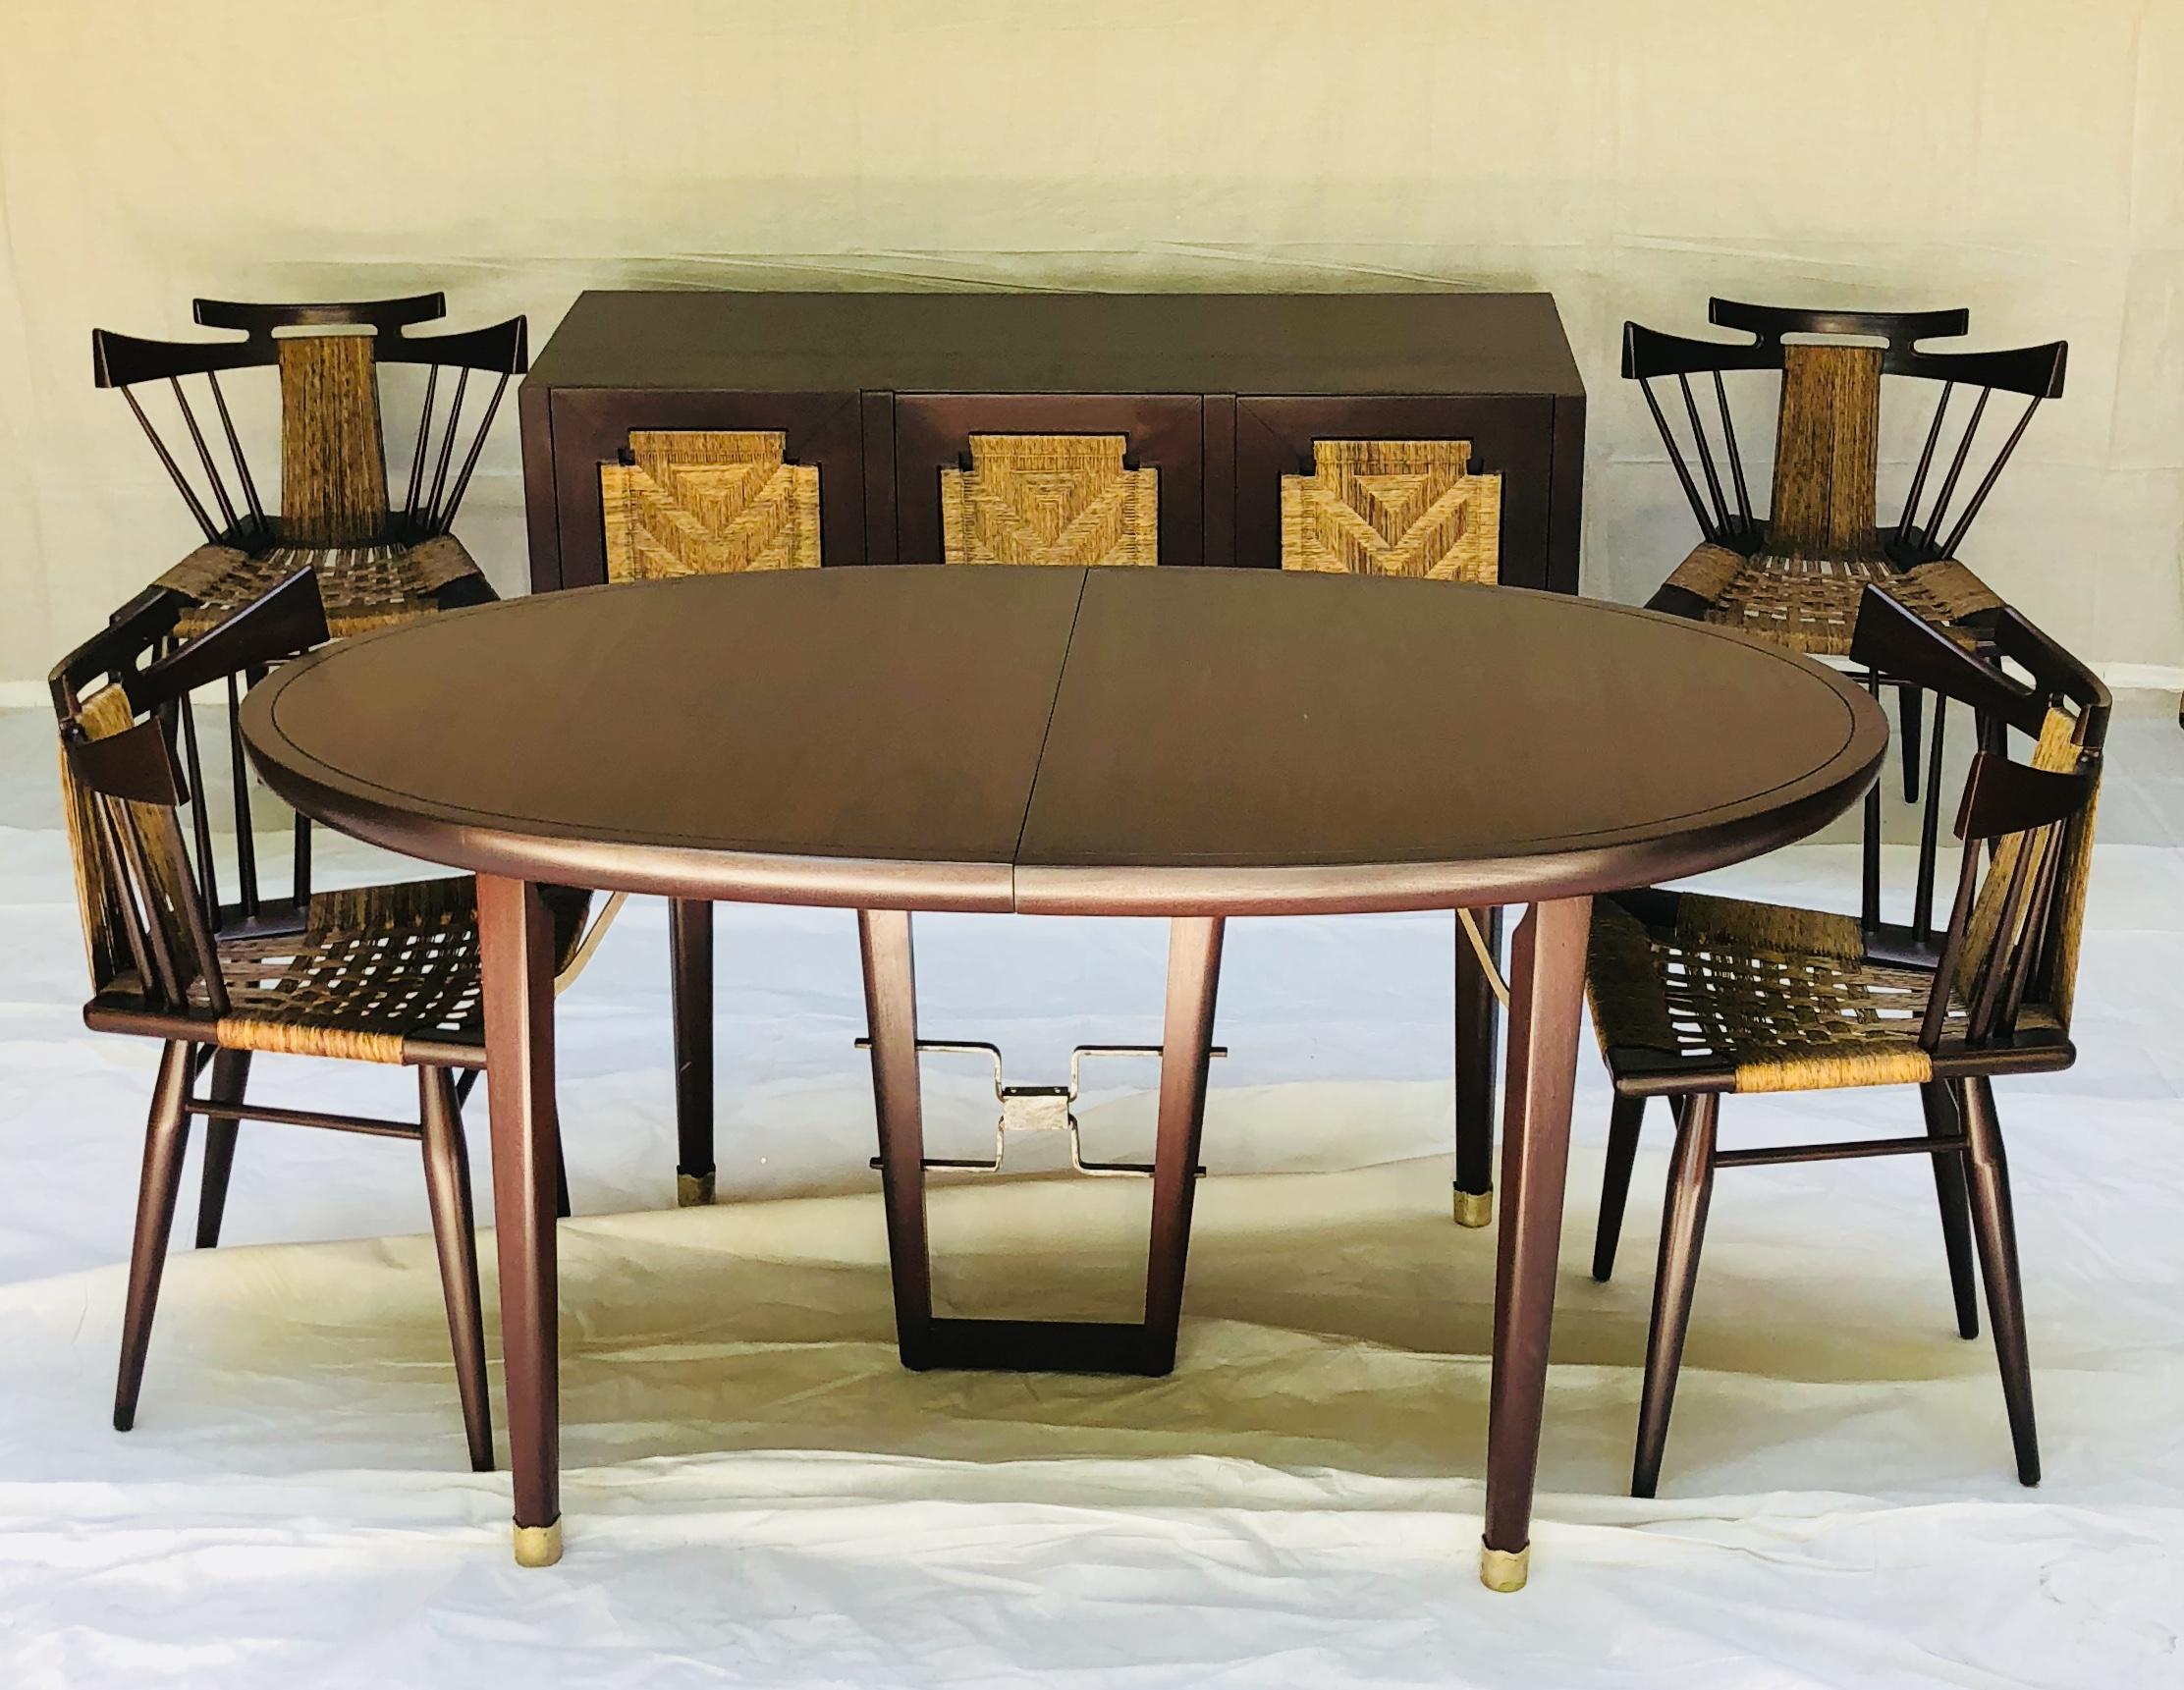 Edmond Spence Mahogany Dining Table Designed for Industria Mueblera, circa 1958 For Sale 1